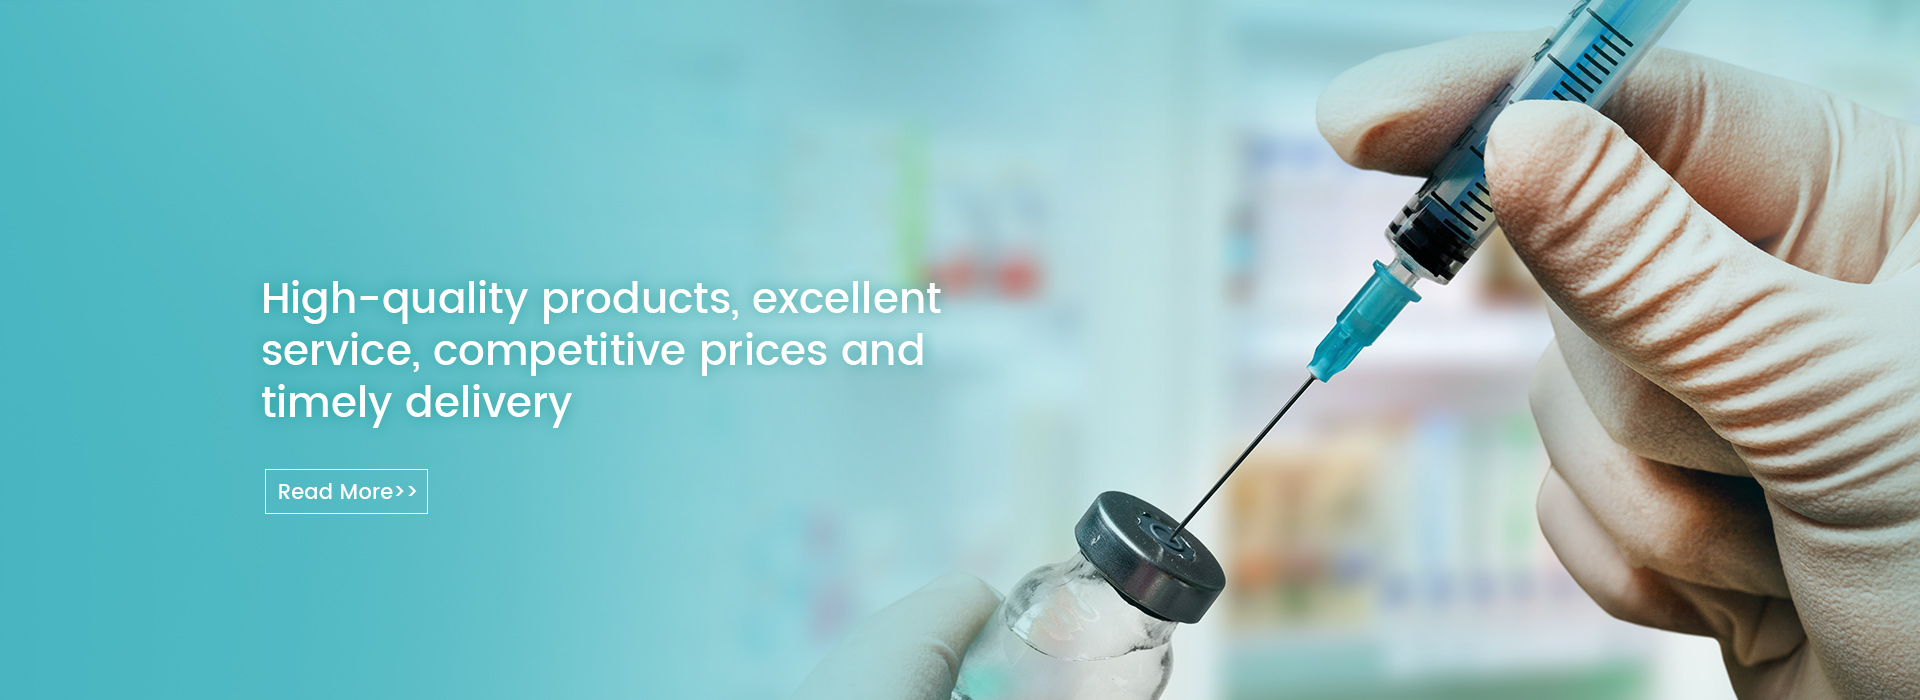 MEDTRUE provide various medical devices, including hospital equipment, medical equipment, medical disposable/consumable products, etc. Contact us now!